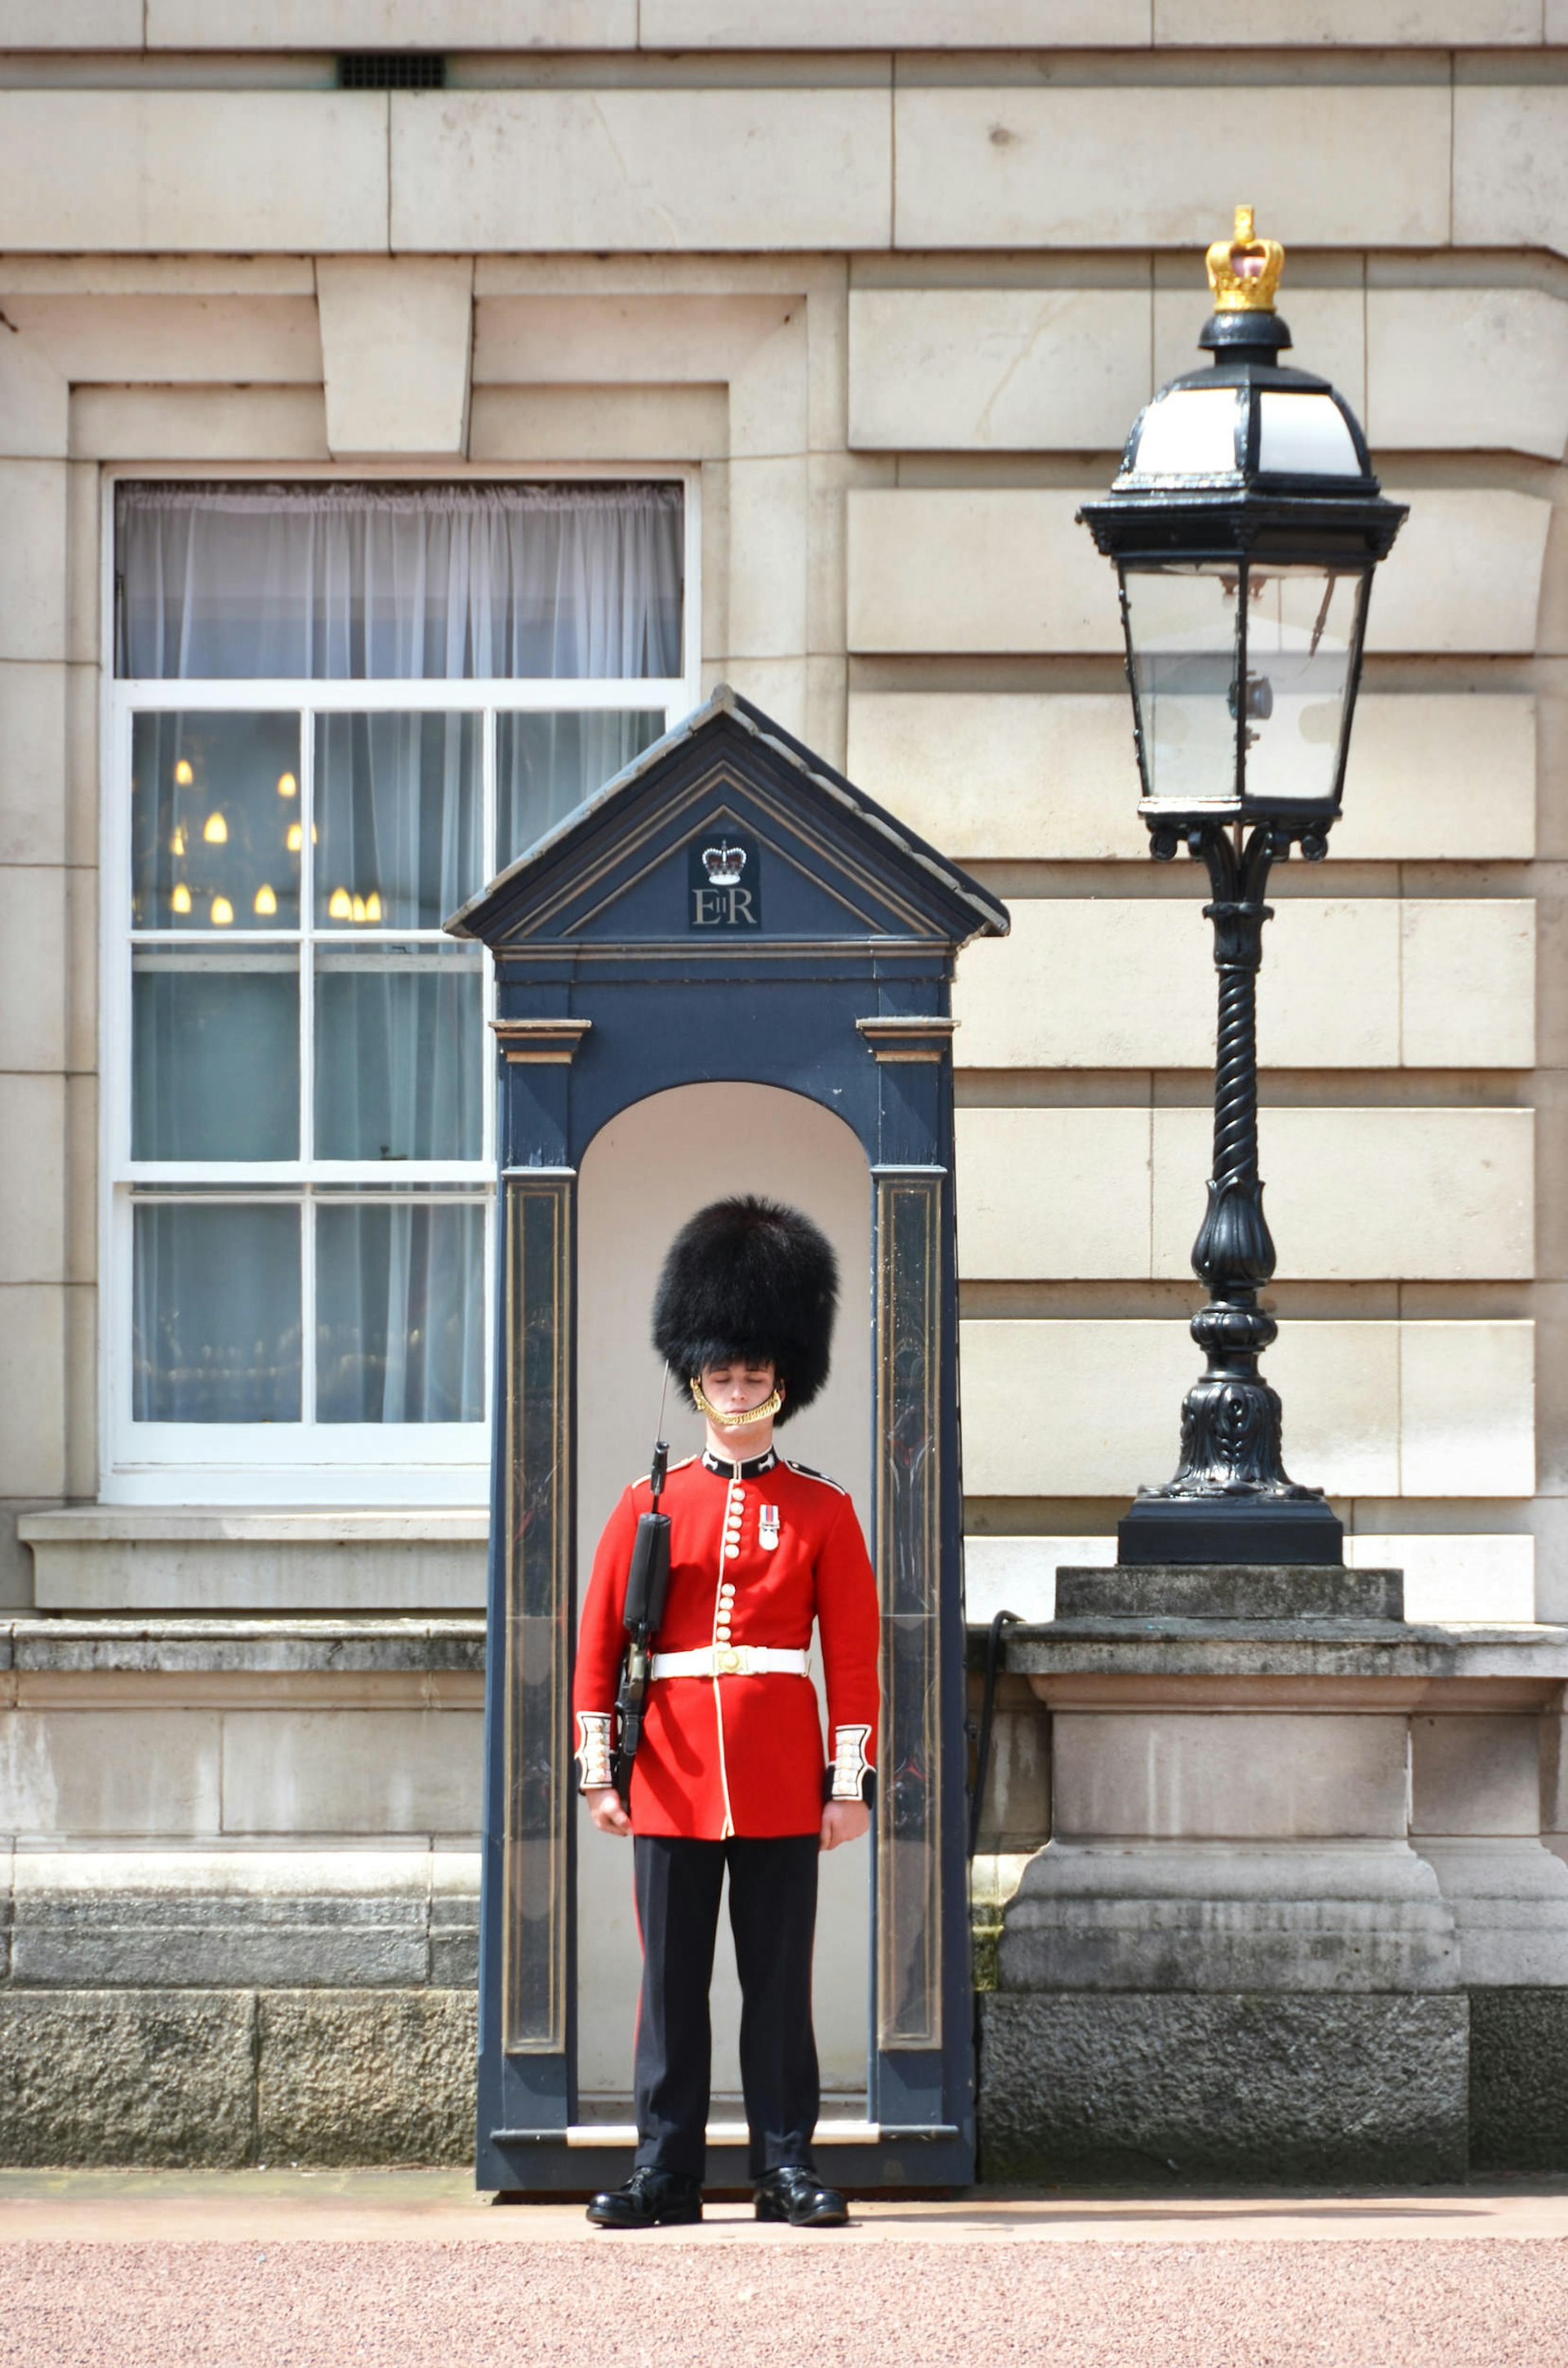 A guard in a fuzzy hat and a red jacket stands at attention in front of a booth and next to an ornate lamp